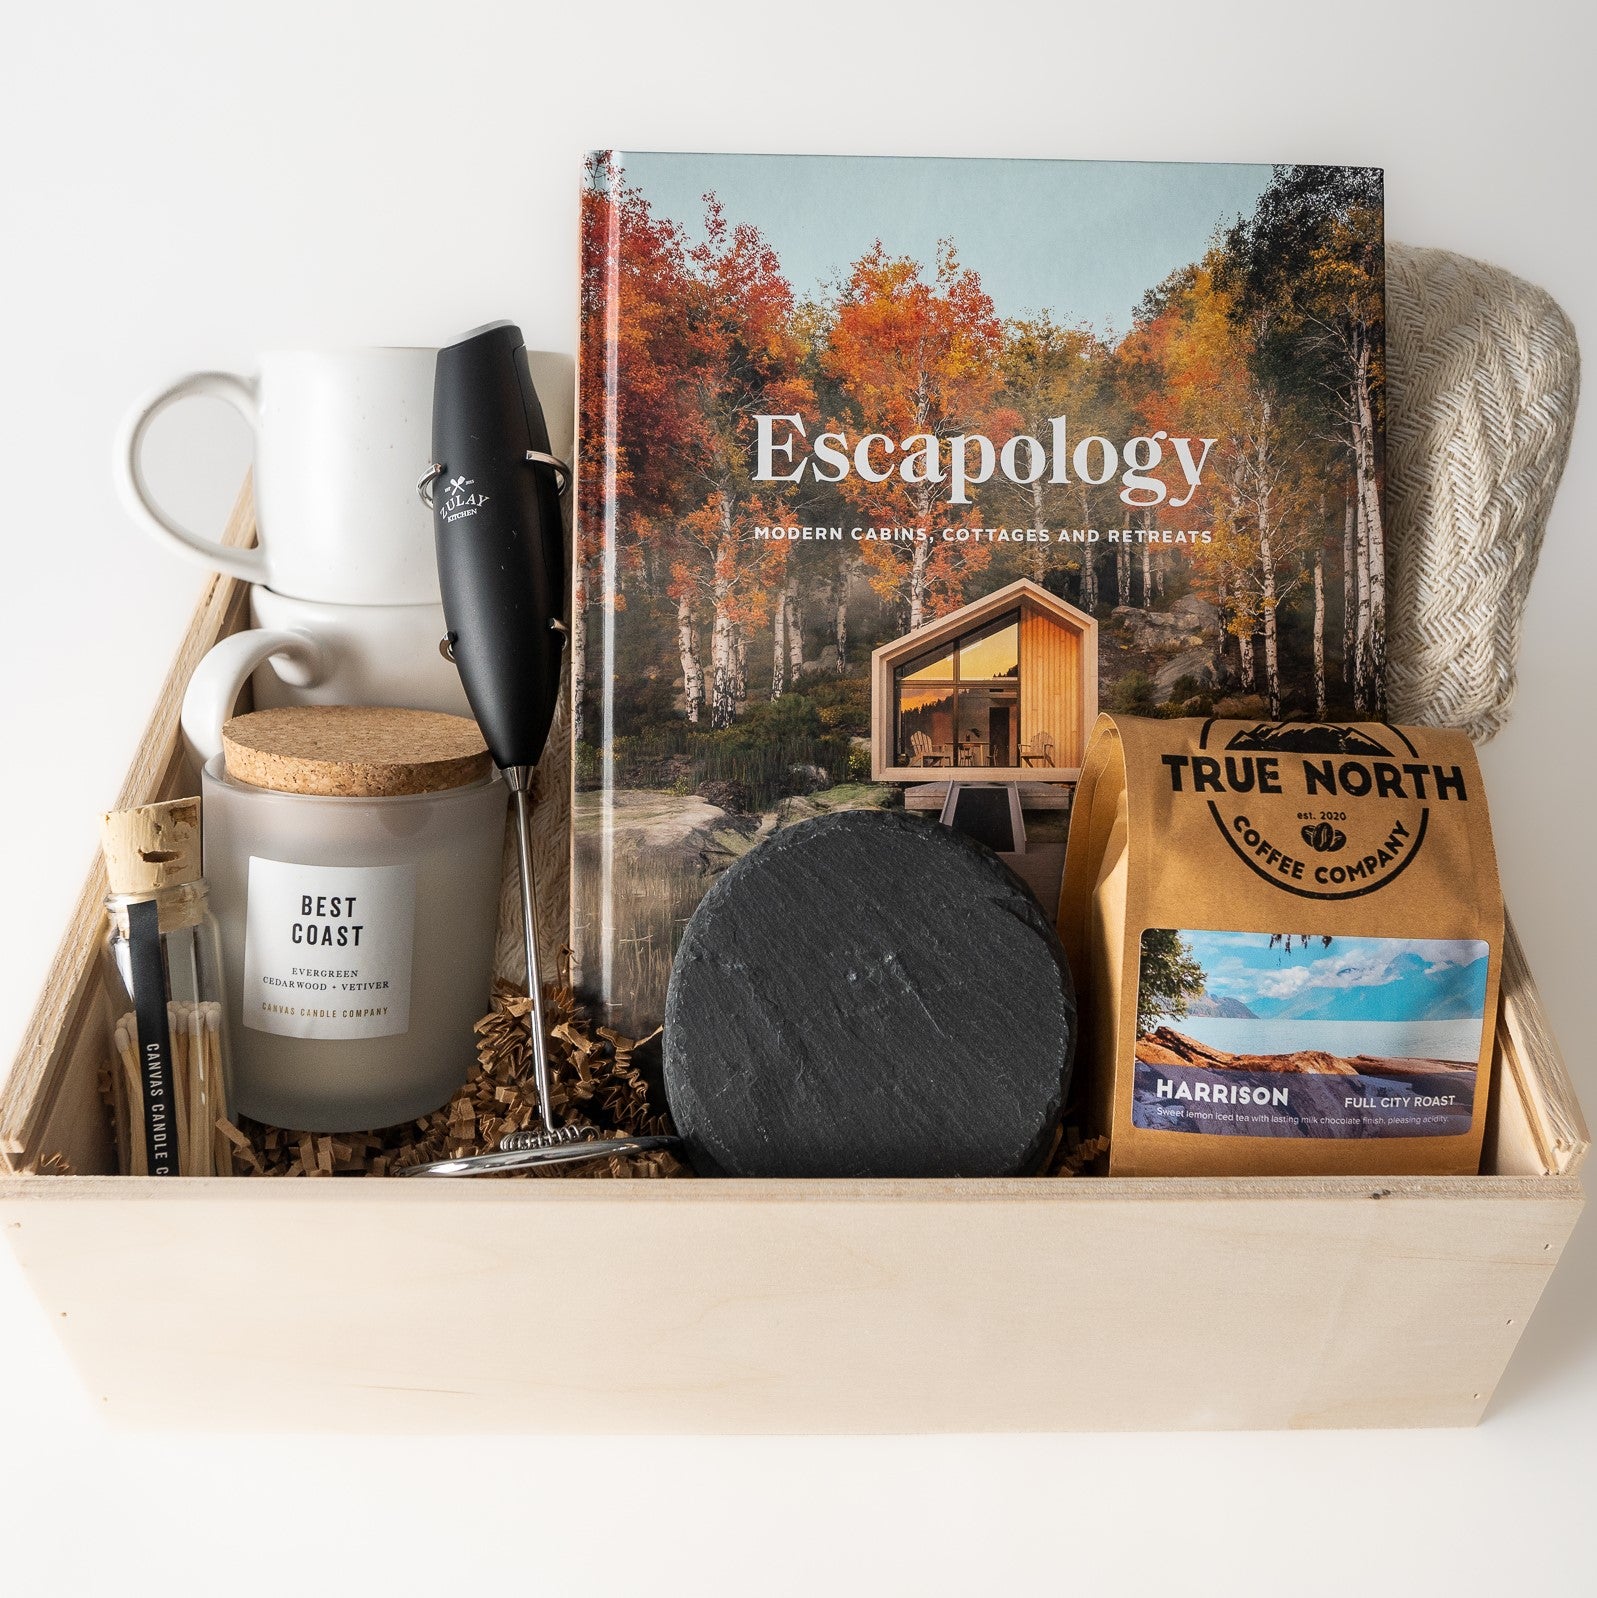 Best Realtor Closing Gifts Over $100.00 | RealEstateClientGifts.com